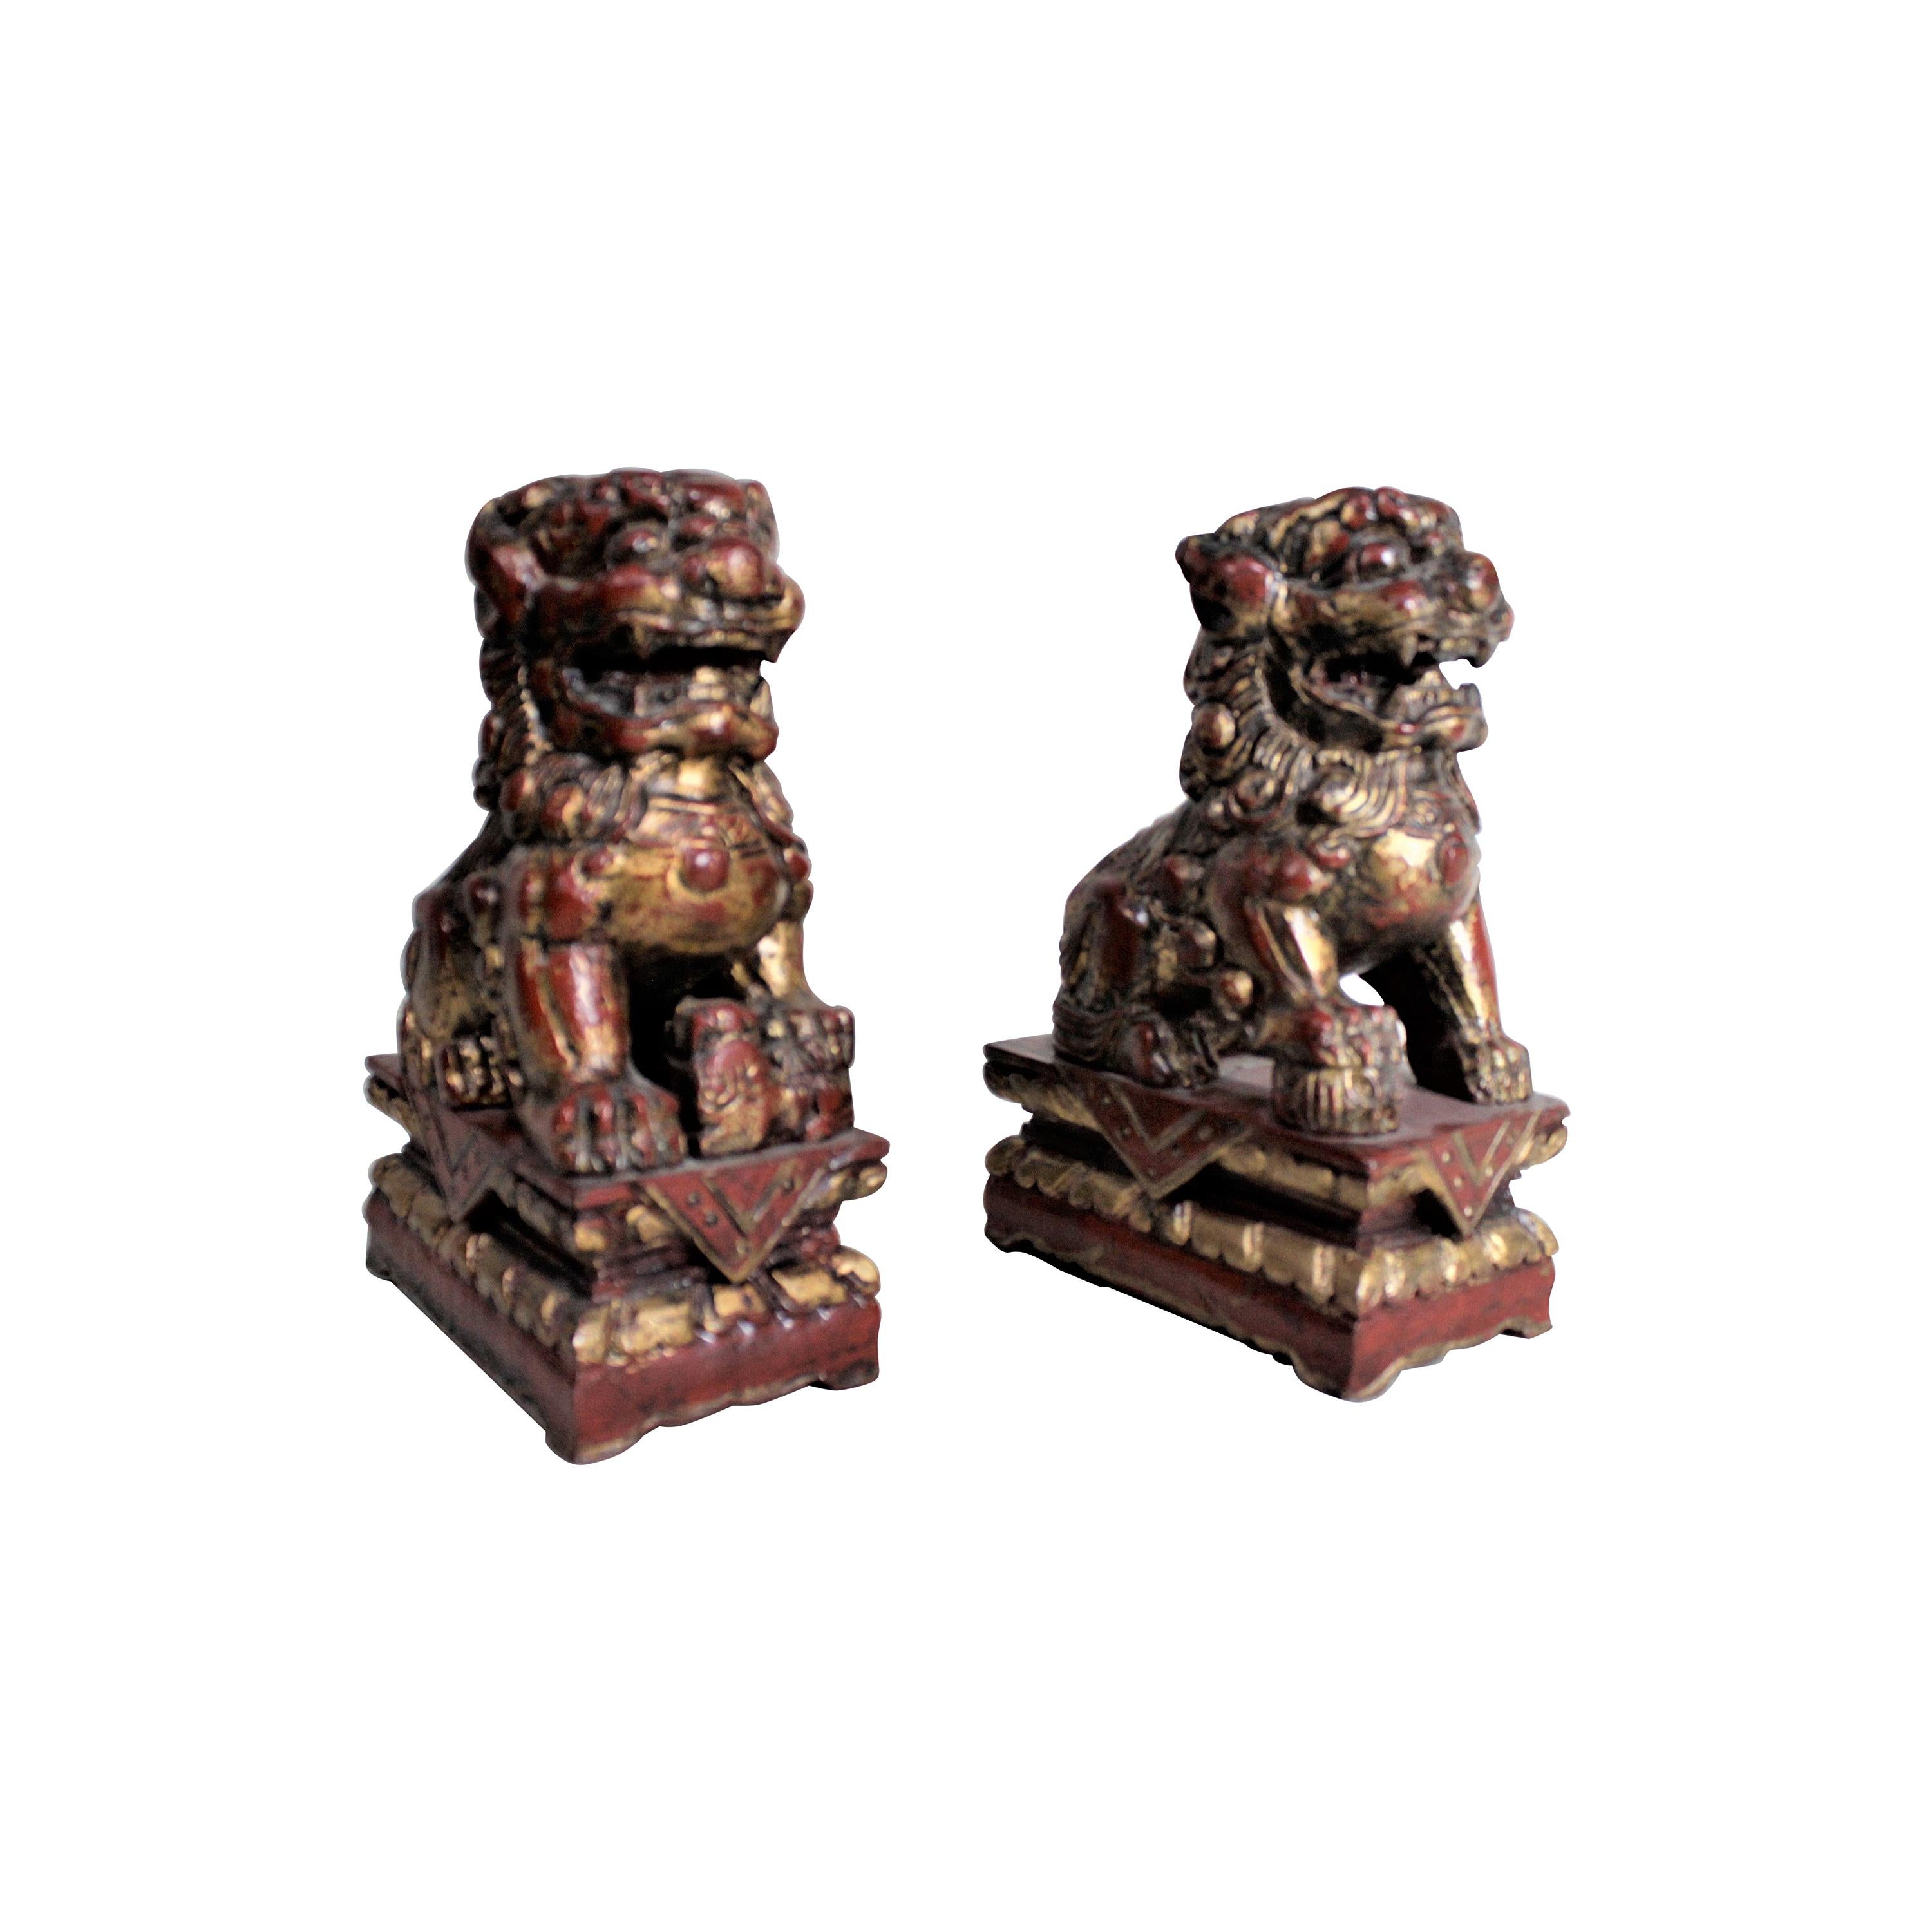 Pair of Carved Wood and Gilt Finished Chinese Foo Dog Figurines or Sculptures